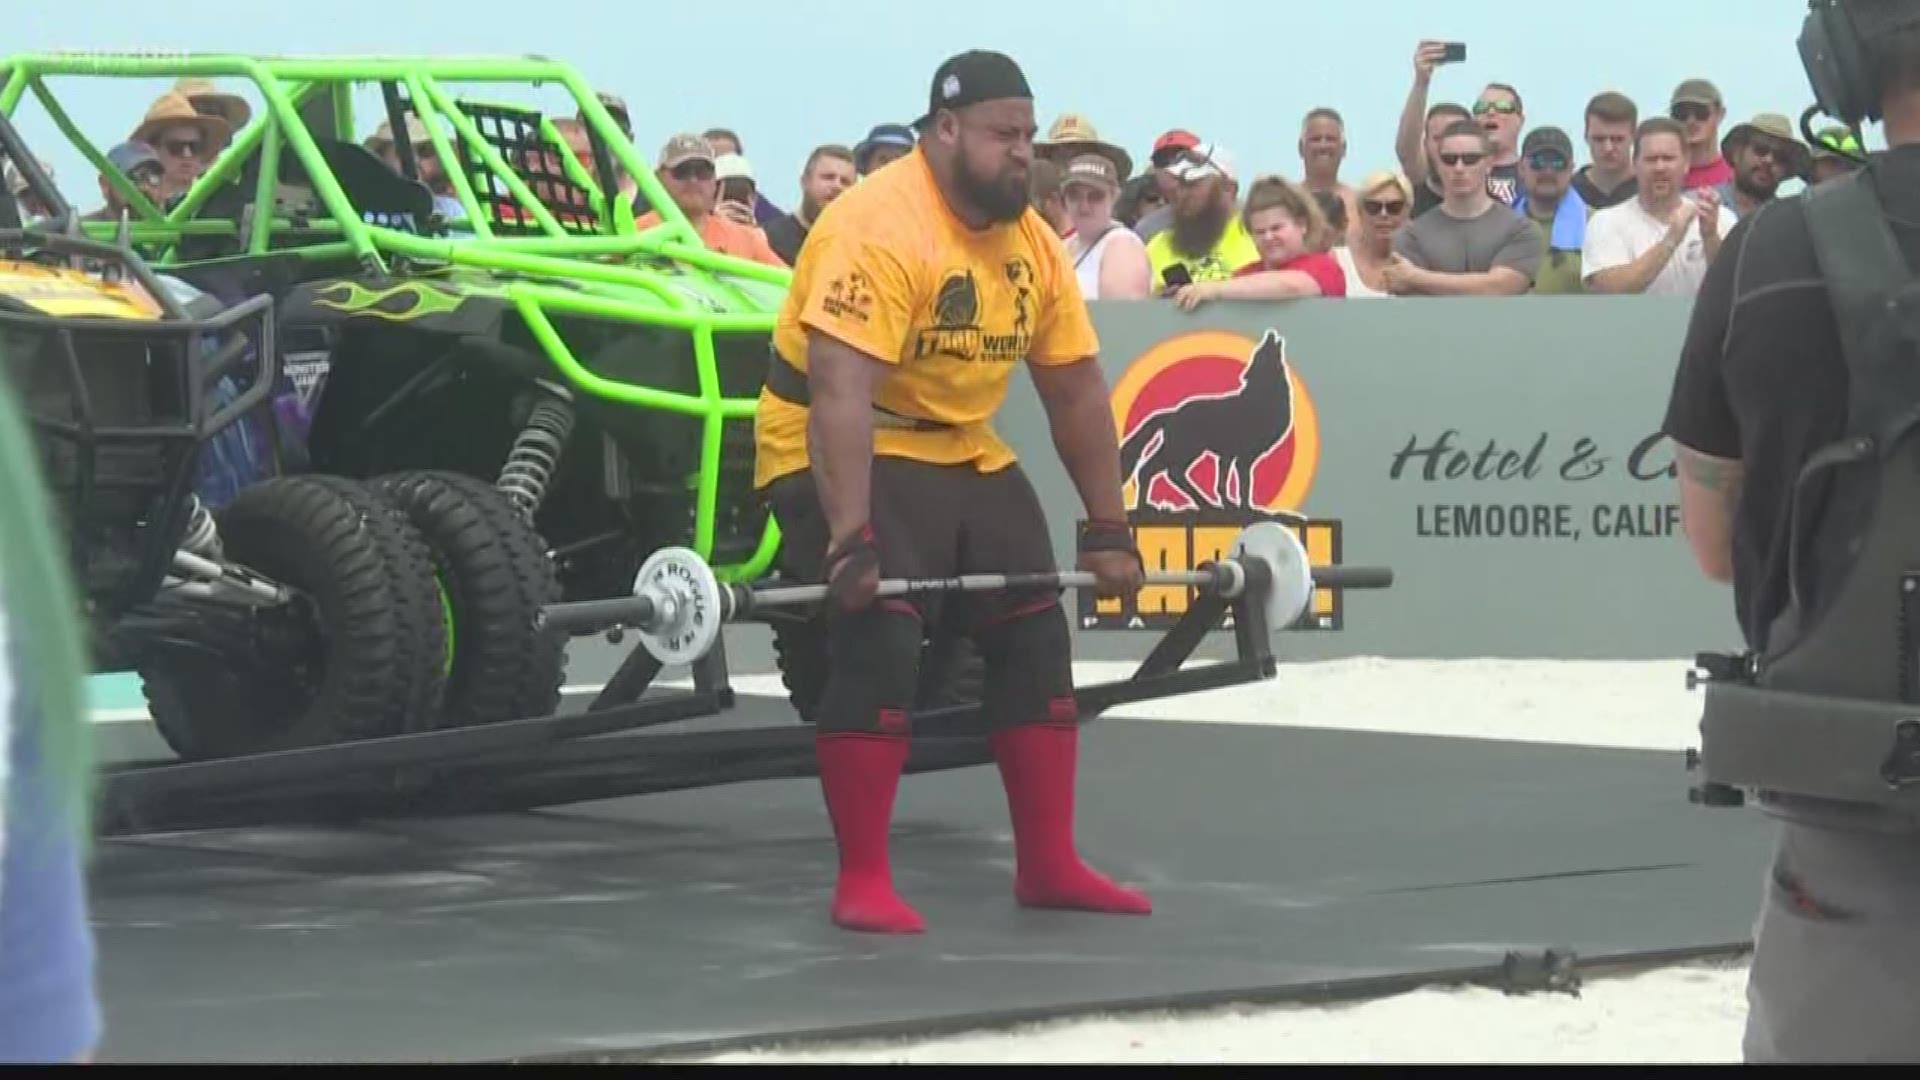 The Tachi Palace World’s Strongest Man competition runs through Sunday in Bradenton. Competitions on Saturday and Sunday are on Manatee Public Beach on Anna Maria Island. This year, "Game of Thrones" star Hafthor Julius Bjornsson is competing.